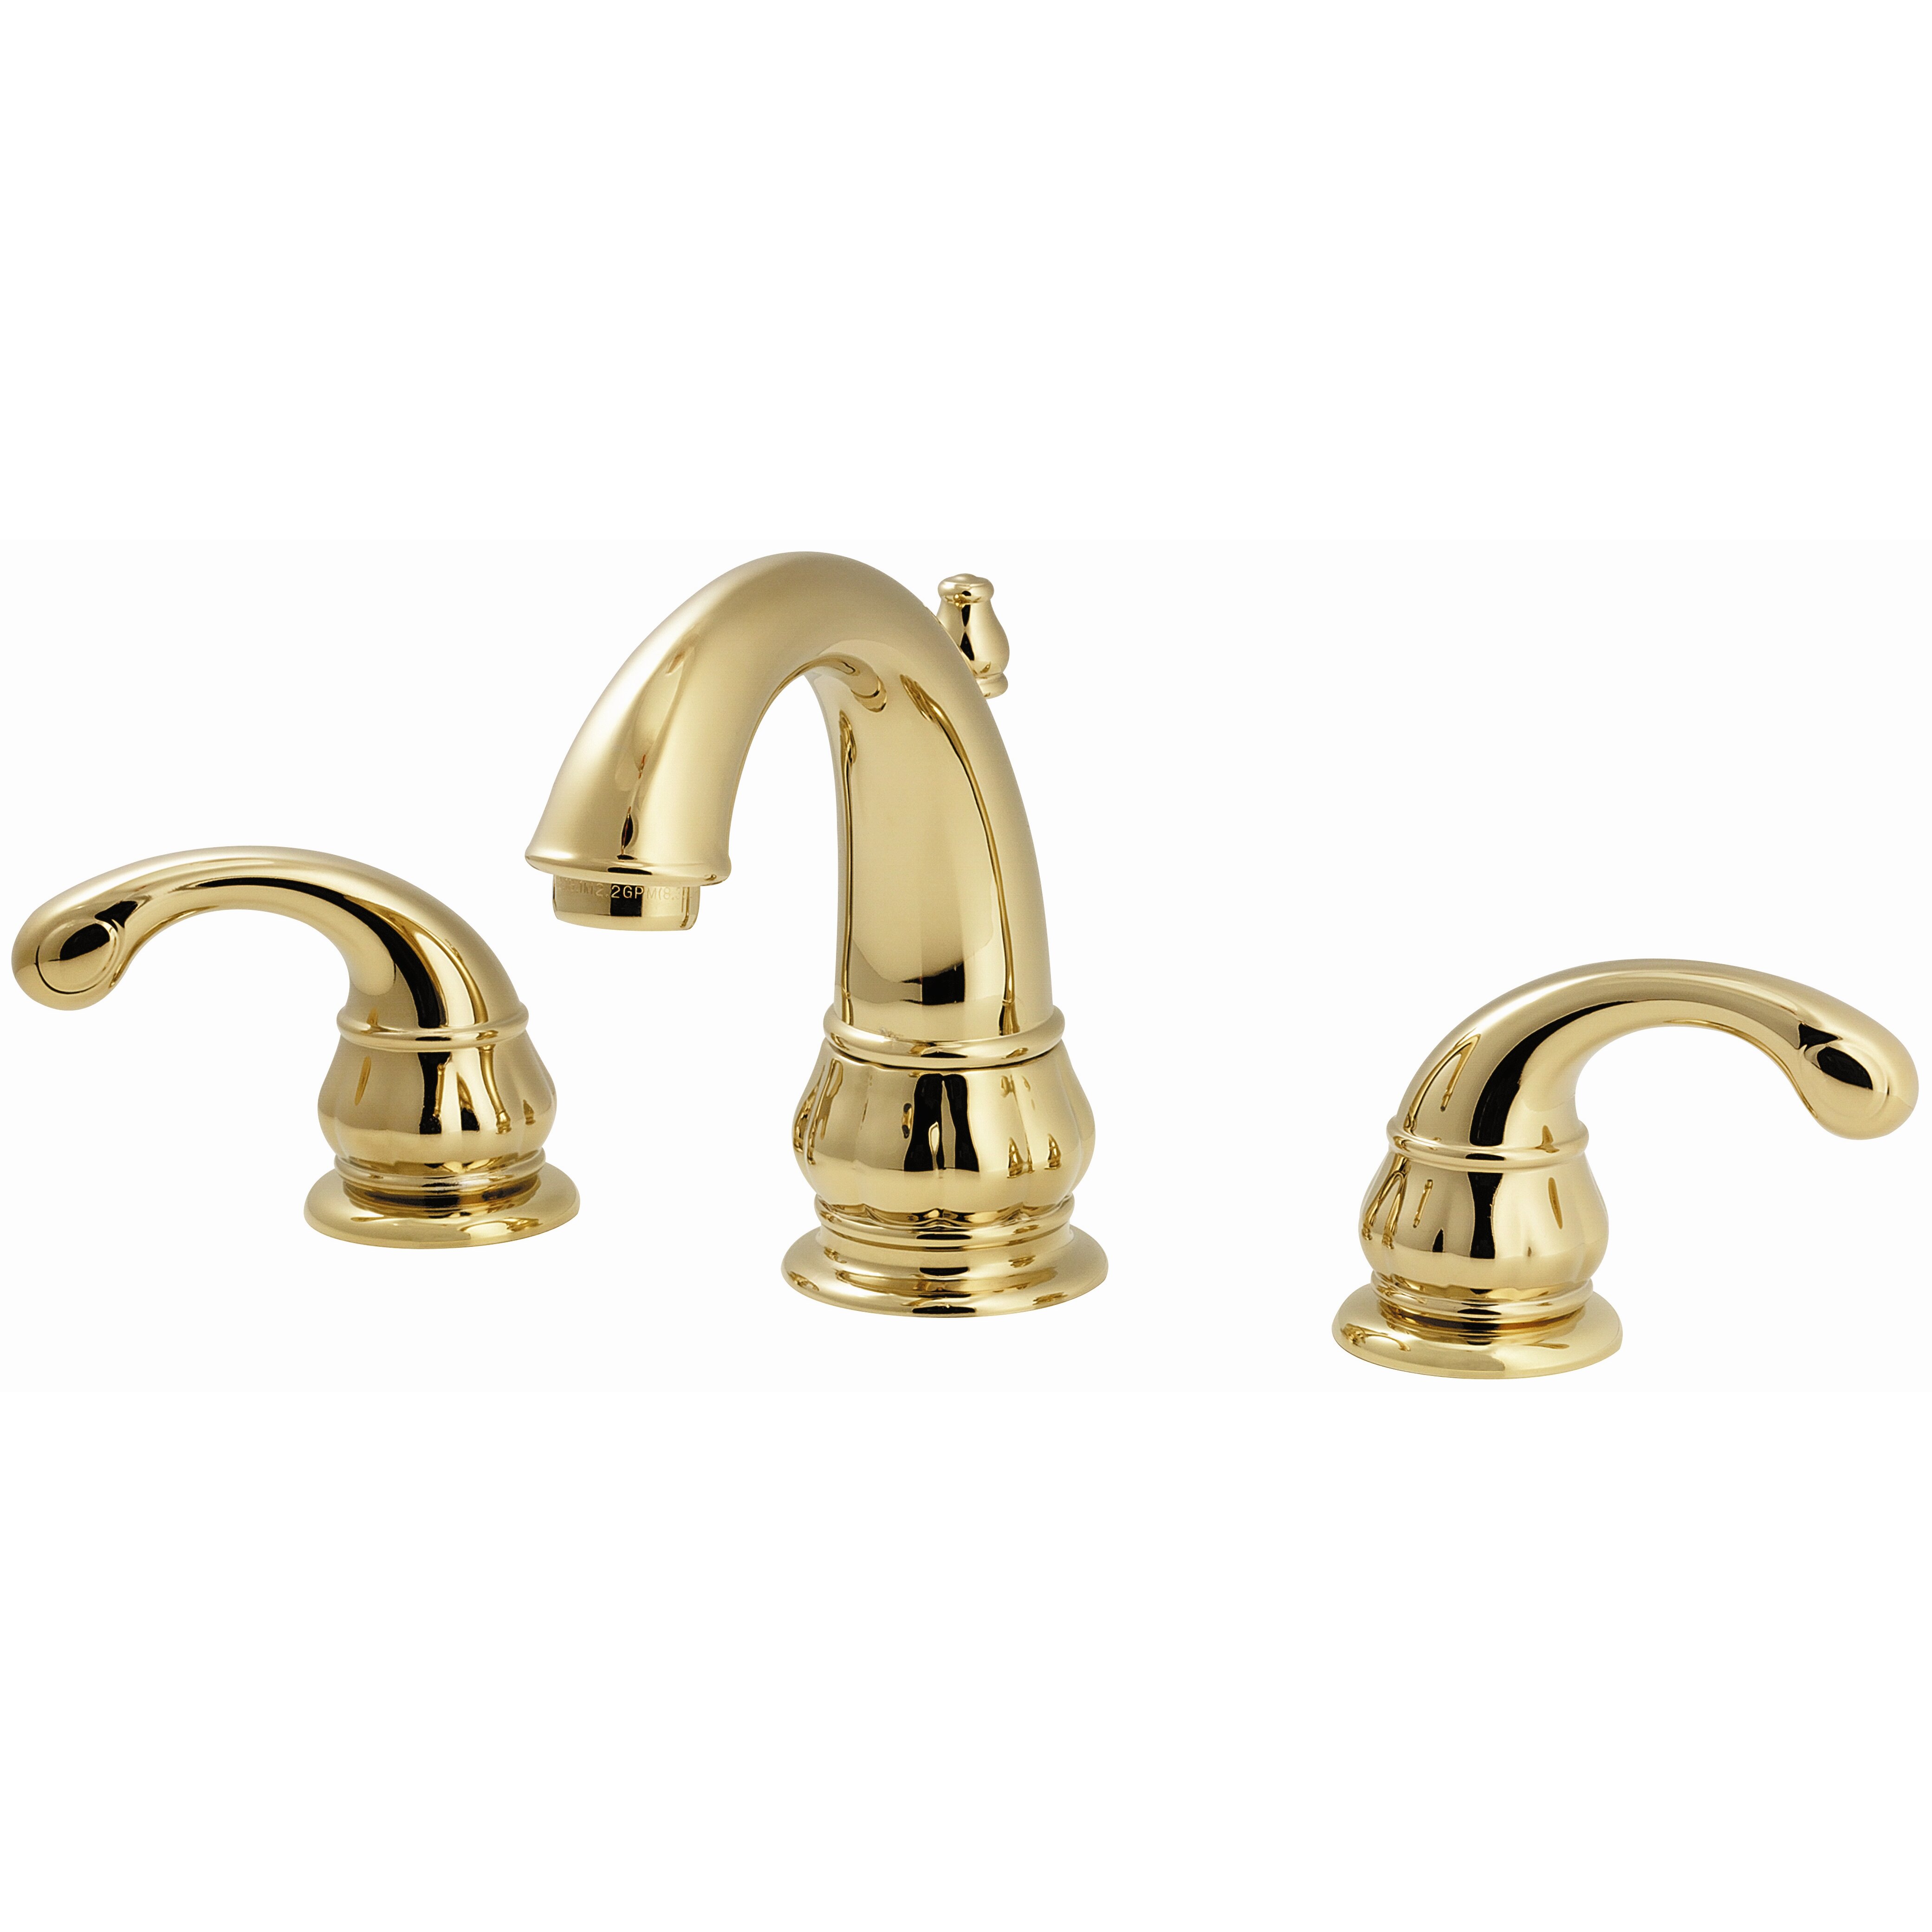 Price Pfister Bathroom Faucets Price Pfister Classic